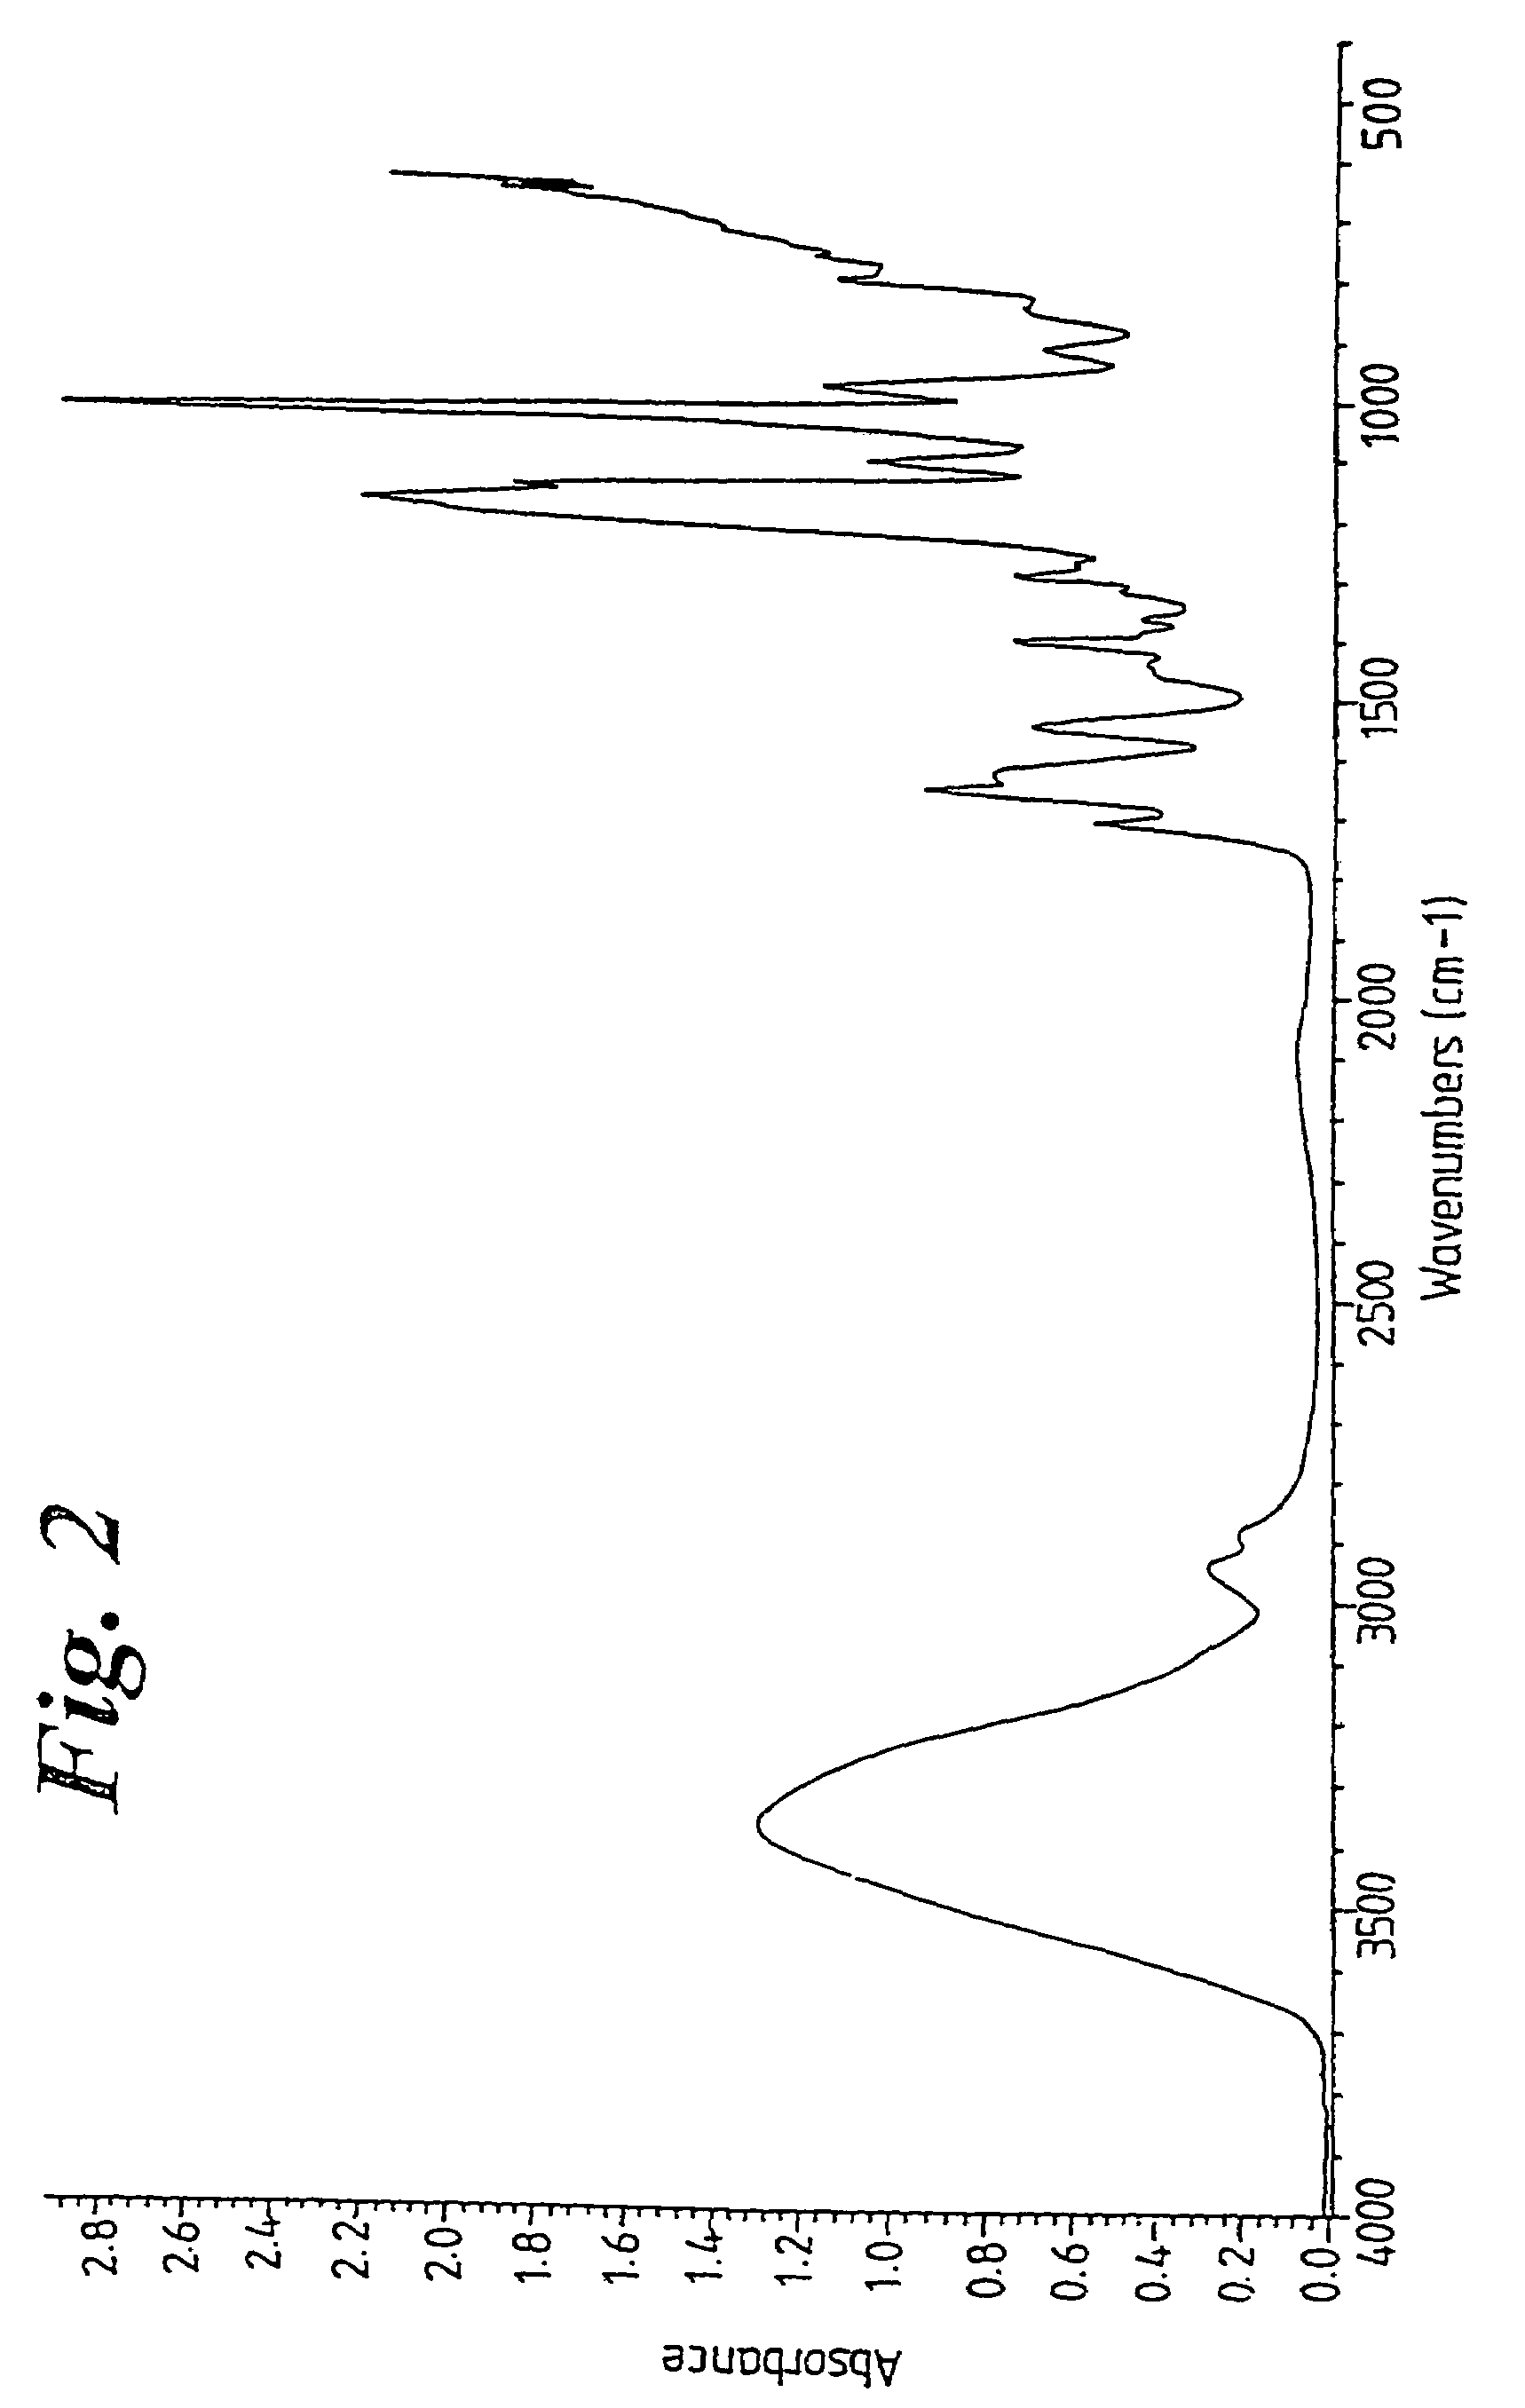 Bioadhesive compositions and biomedical electrodes containing them